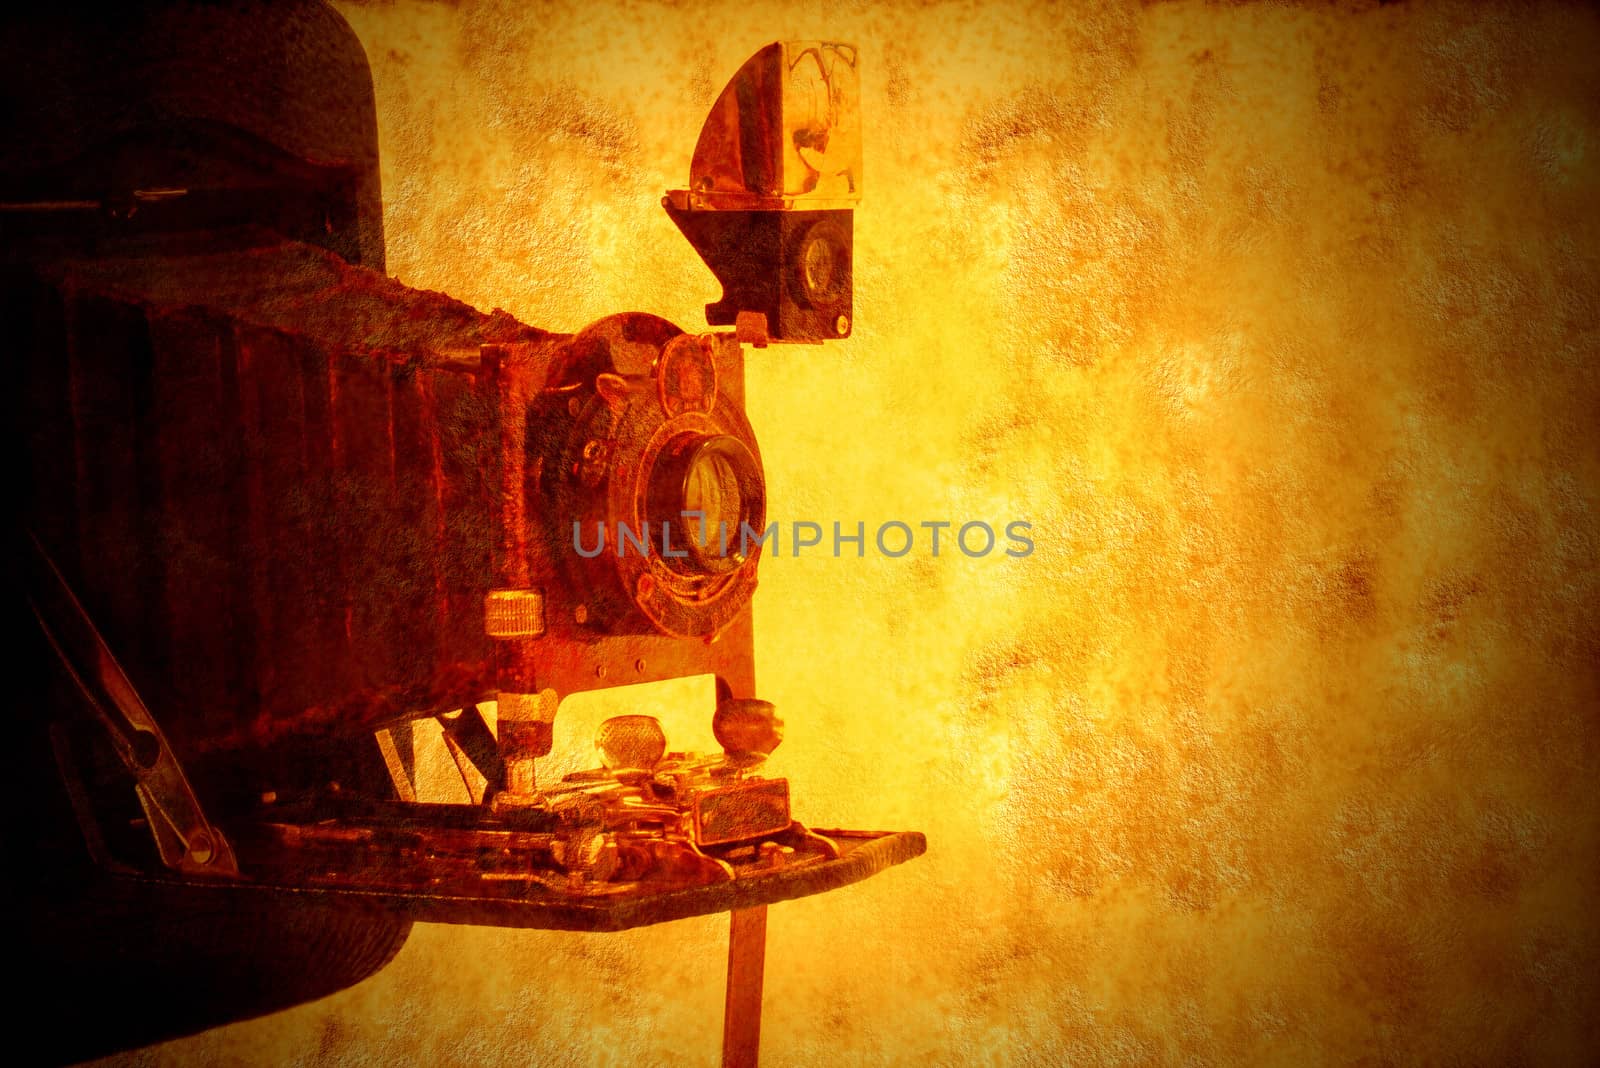  vintage bellows camera grunge background by Carche